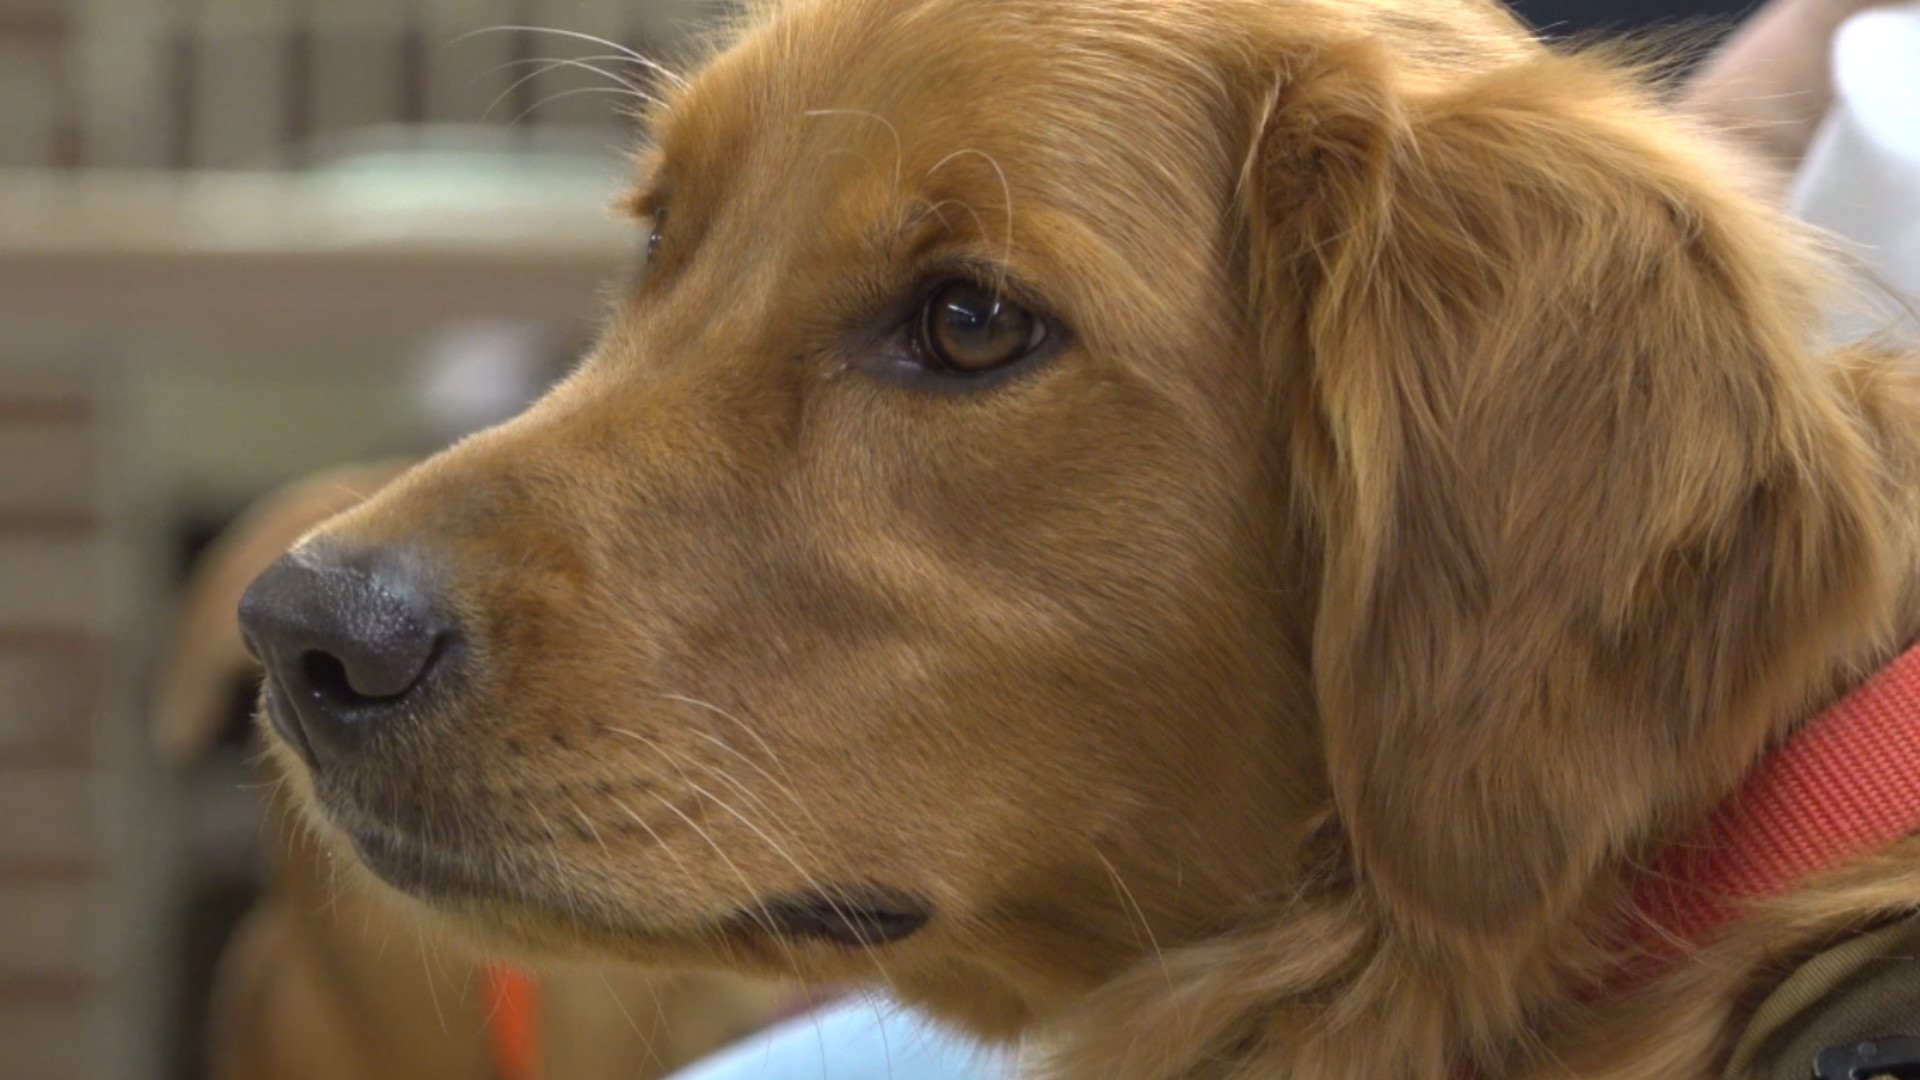 A York County group is helping people help themselves by training their own service dog.